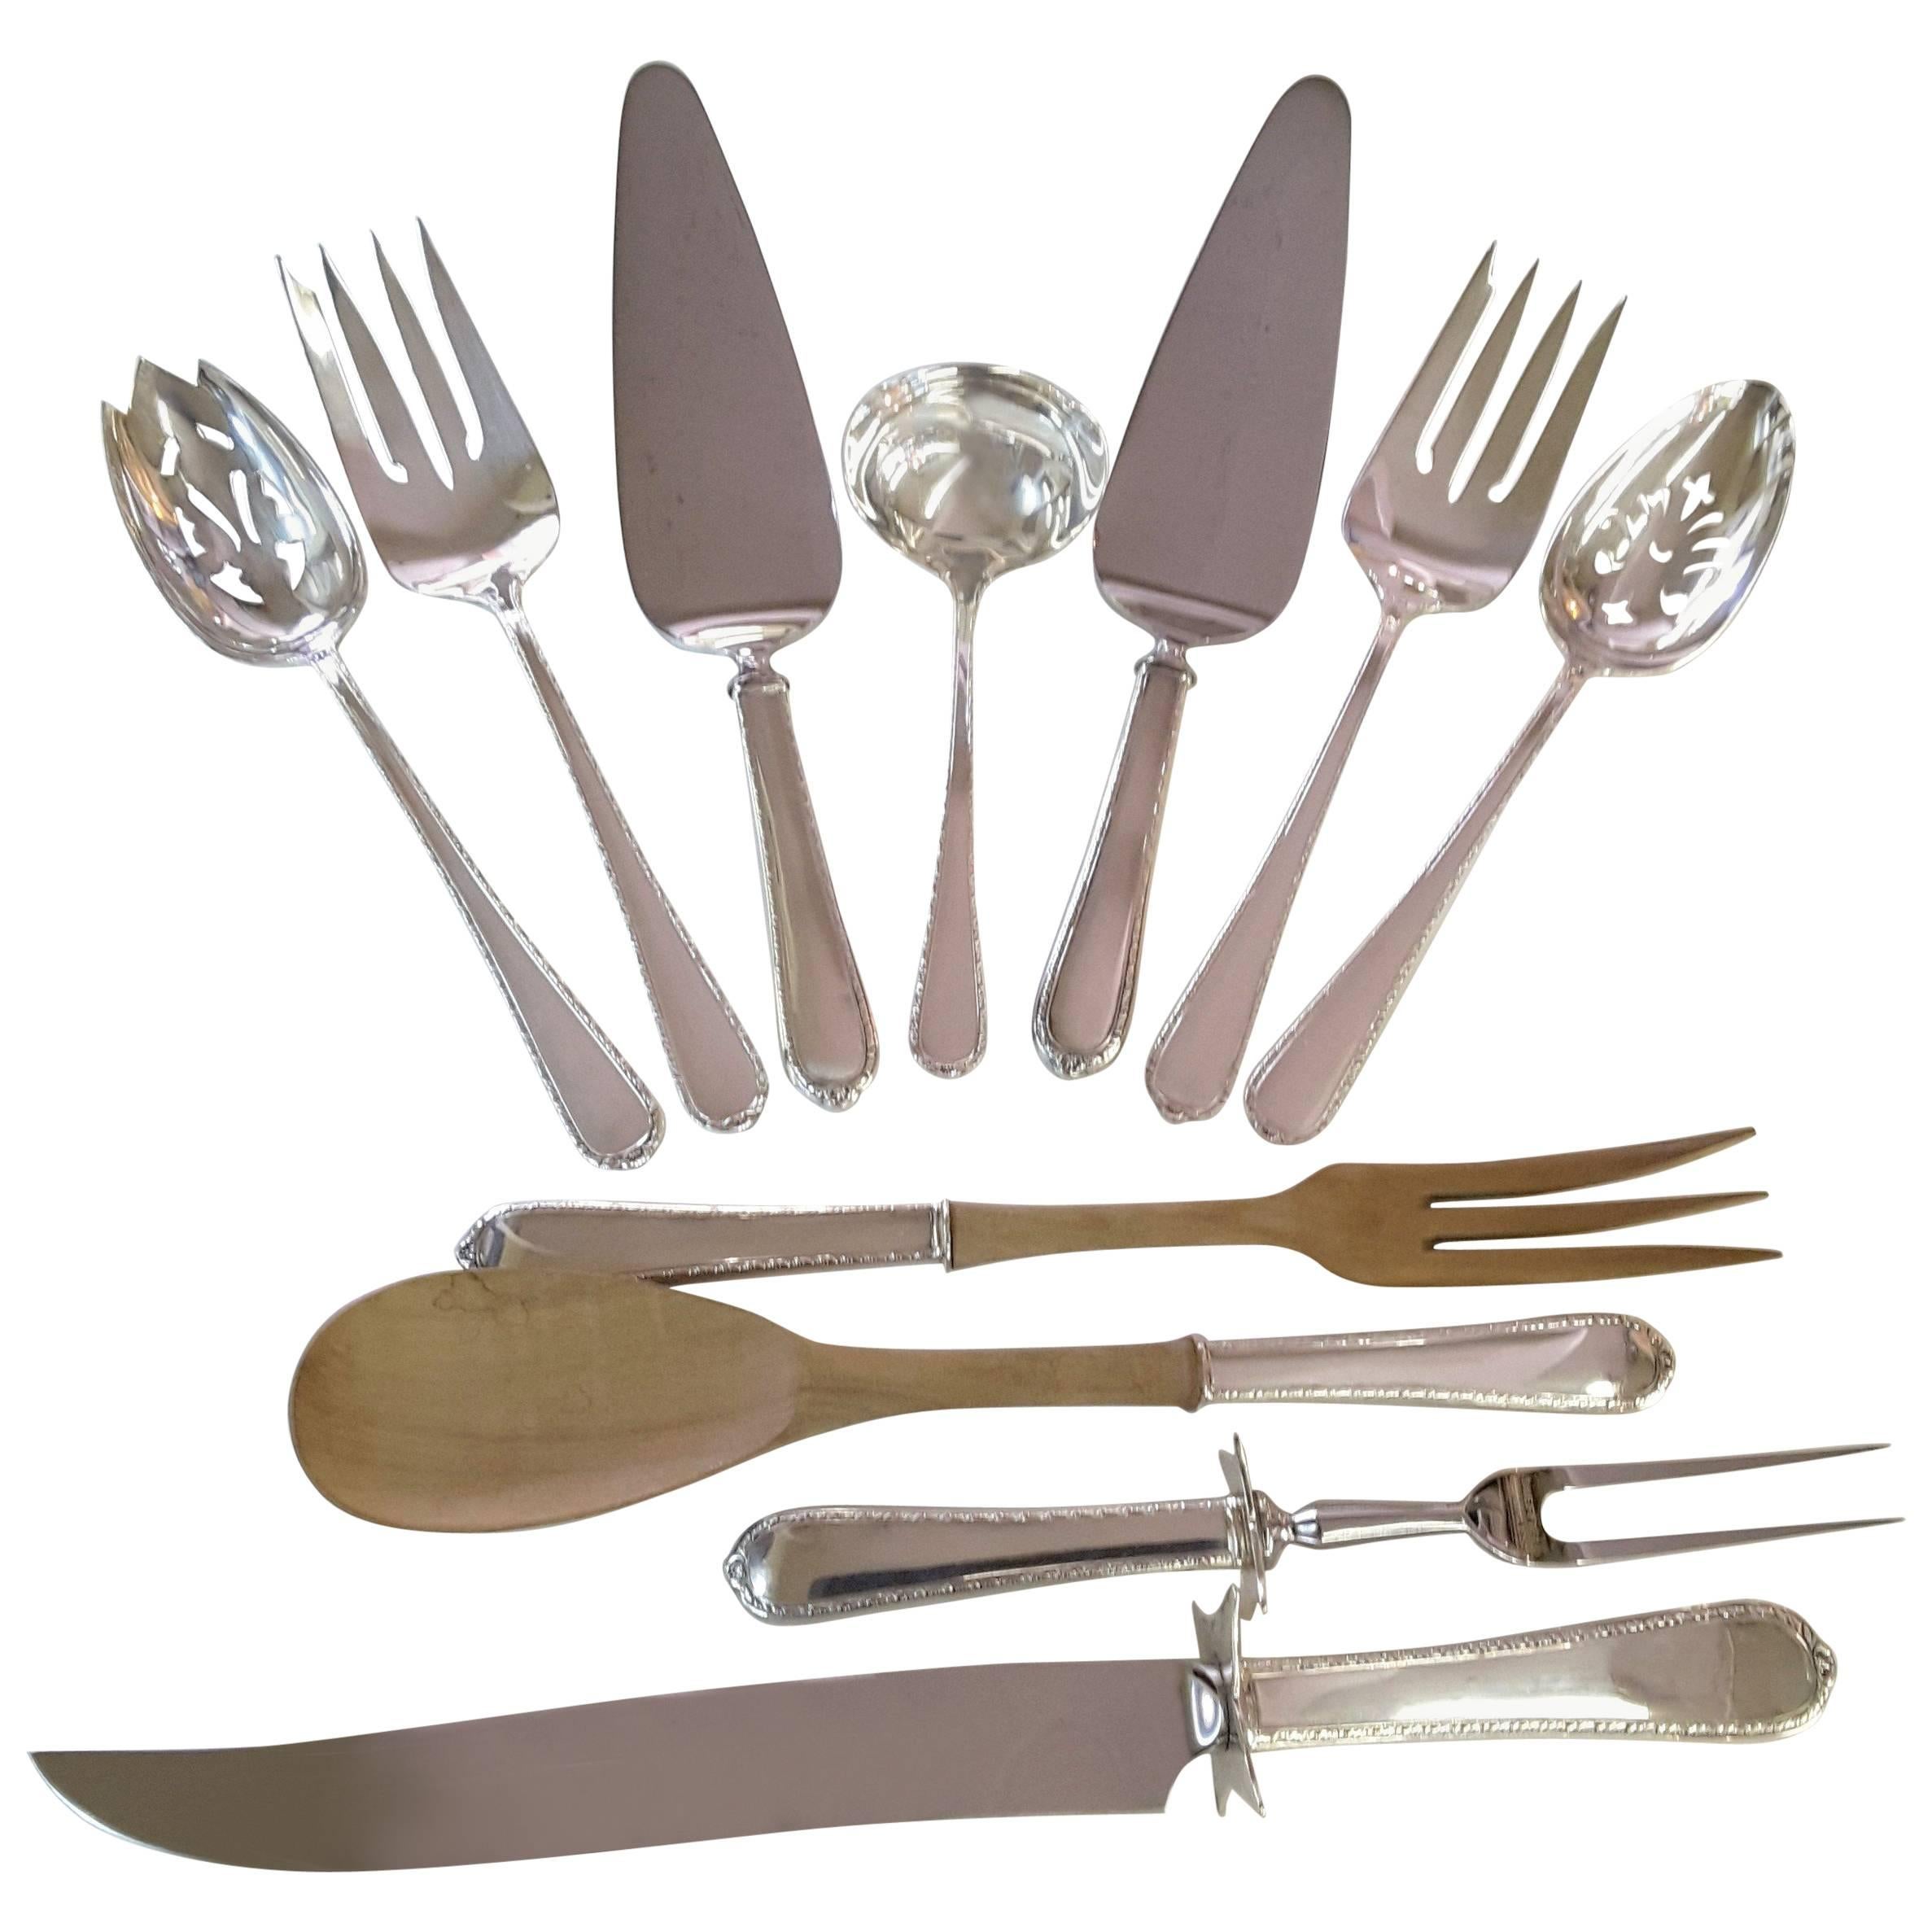 11 Serving Pieces of Pine Tree International Sterling Silver Flatware